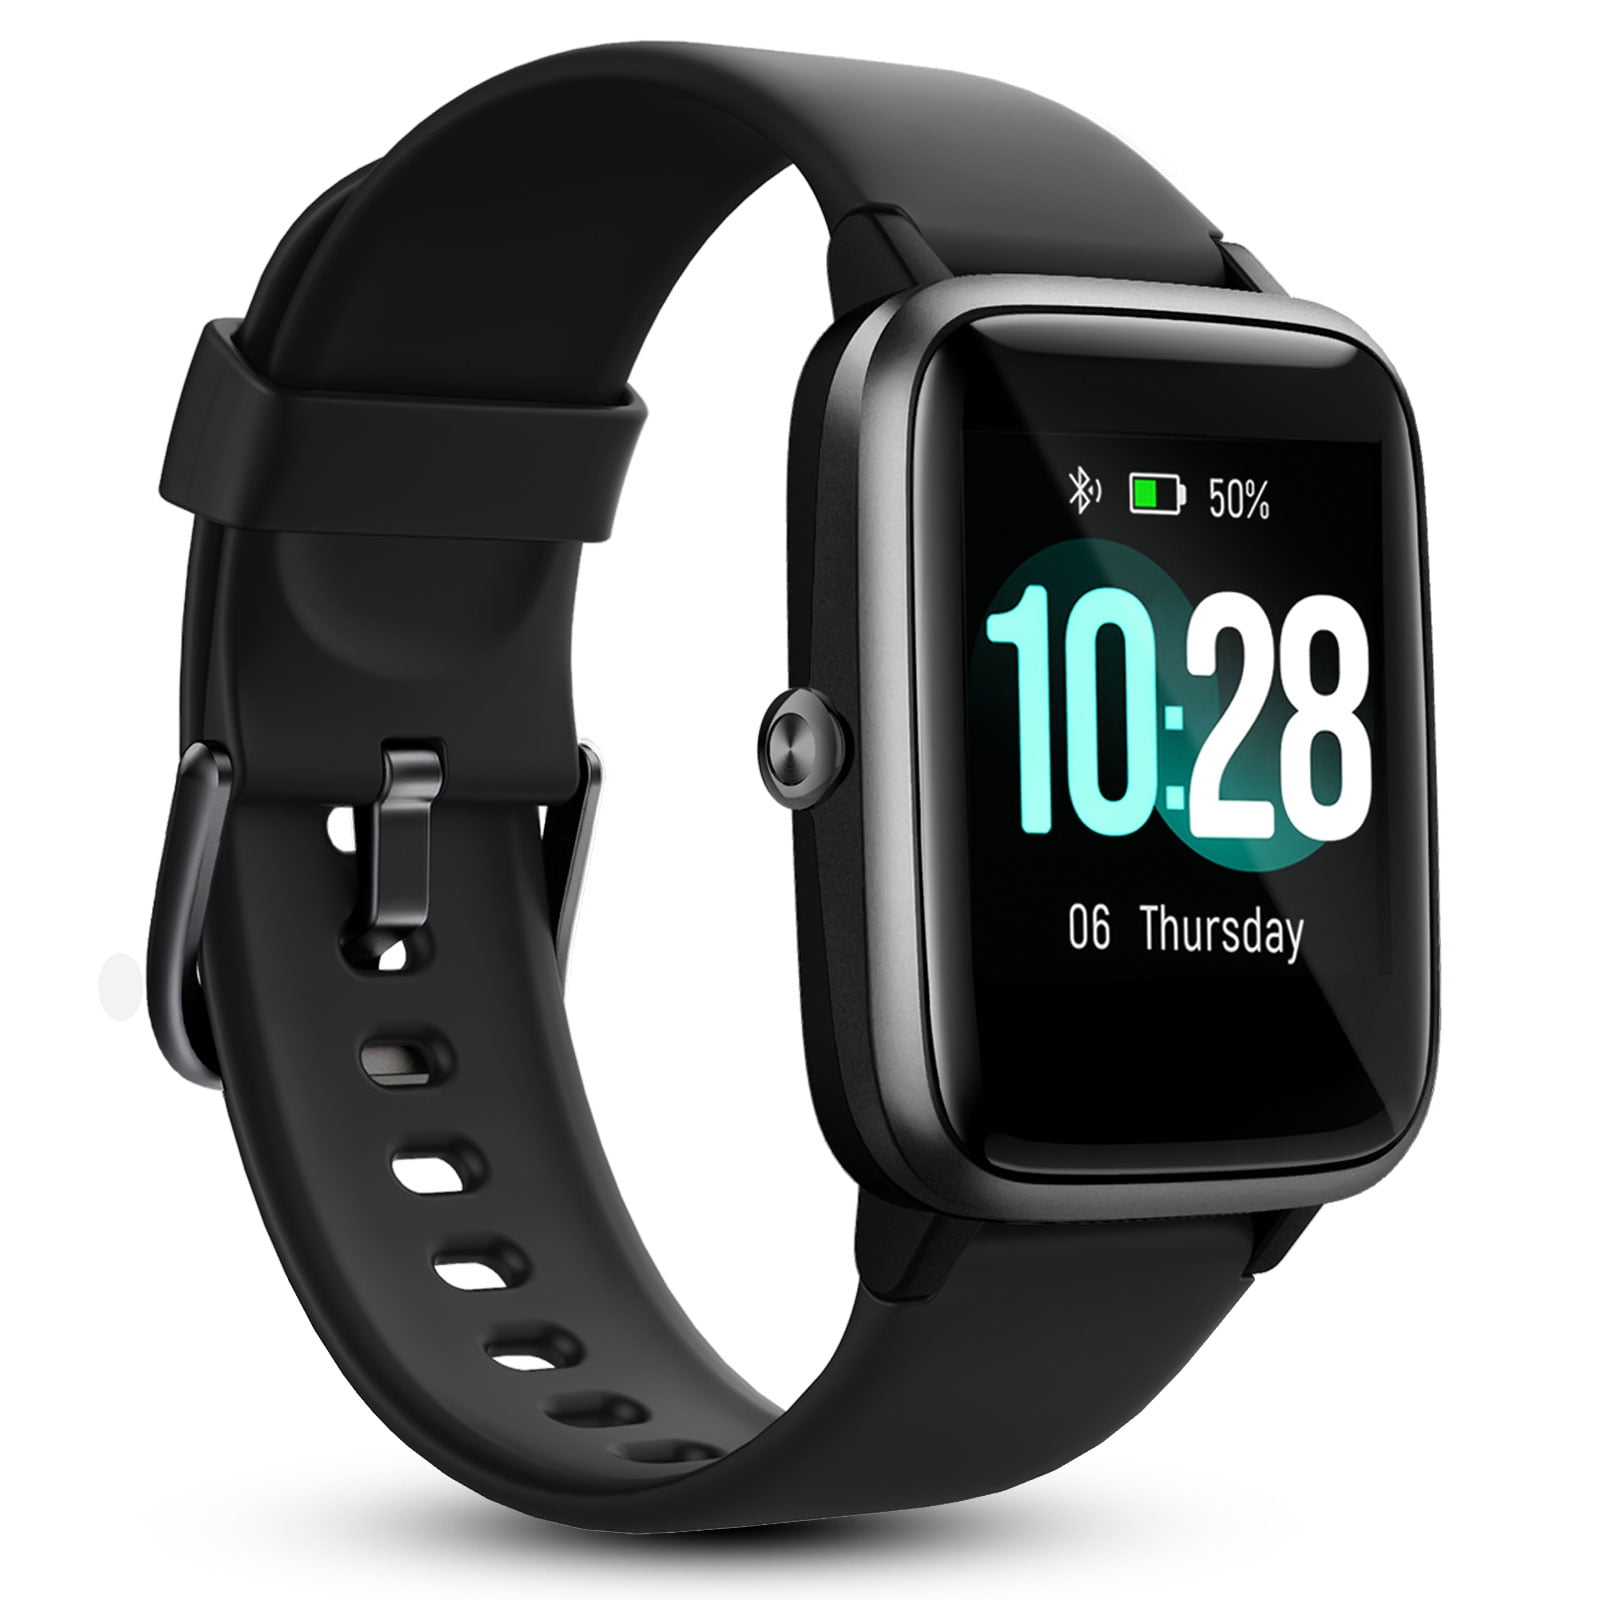 Waterproof Fitness Smart Watches Men Women Lady Heart Rate Tracker iOS Android 